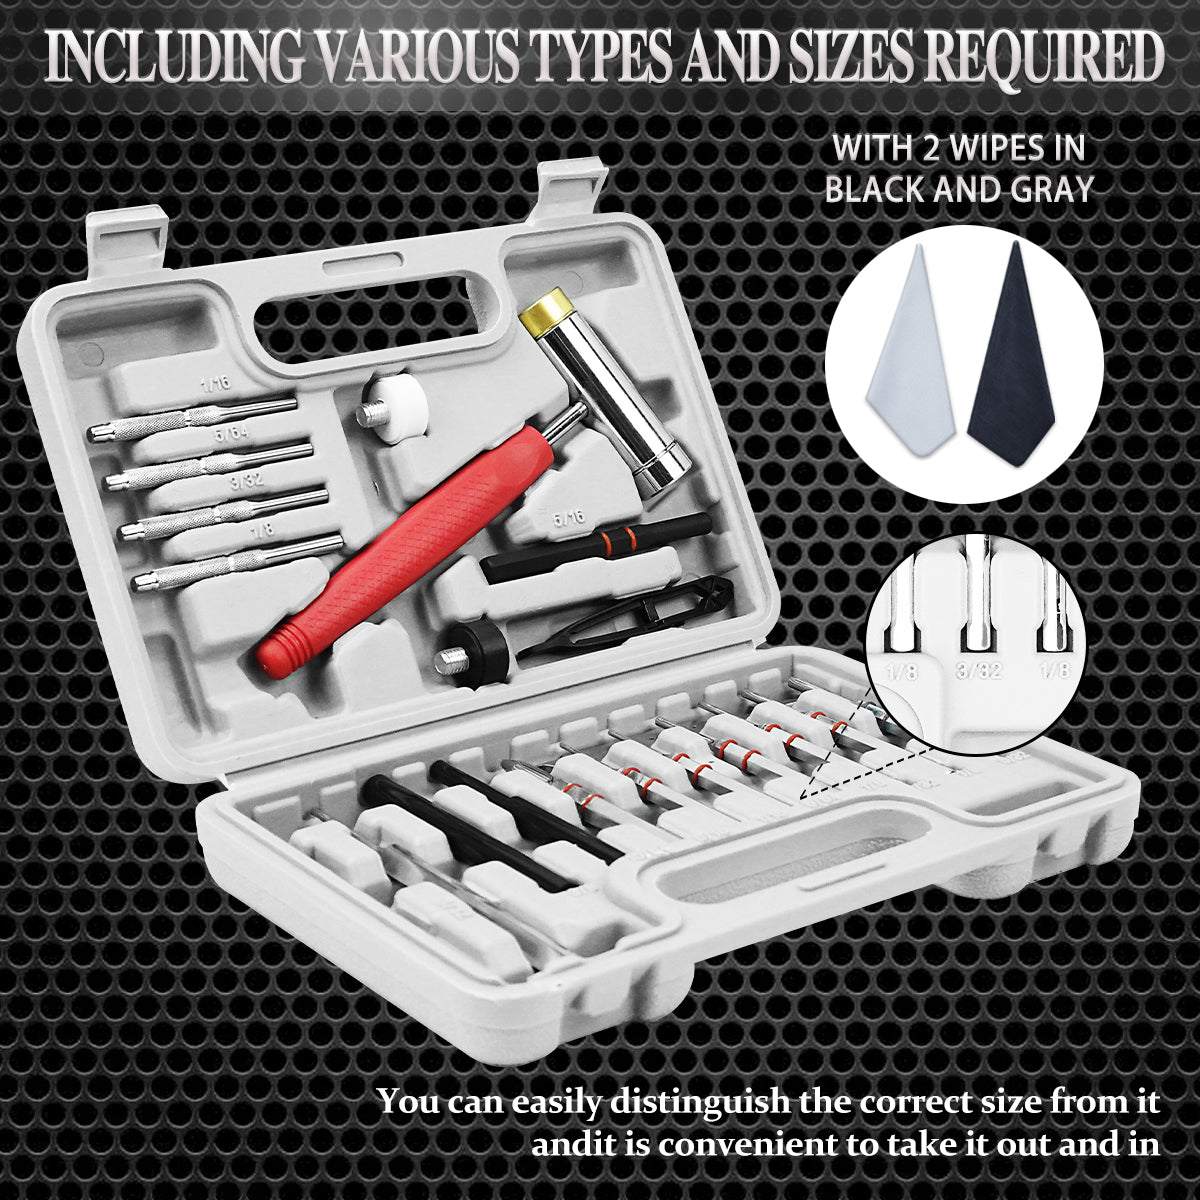 BESTNULE Roll Pin Punch Set, Punch Tools, Made of Solid Material Including Steel Punch and Hammer, Ideal for Machinery Maintenance with Organizer Storage Container (Without Bench Block)